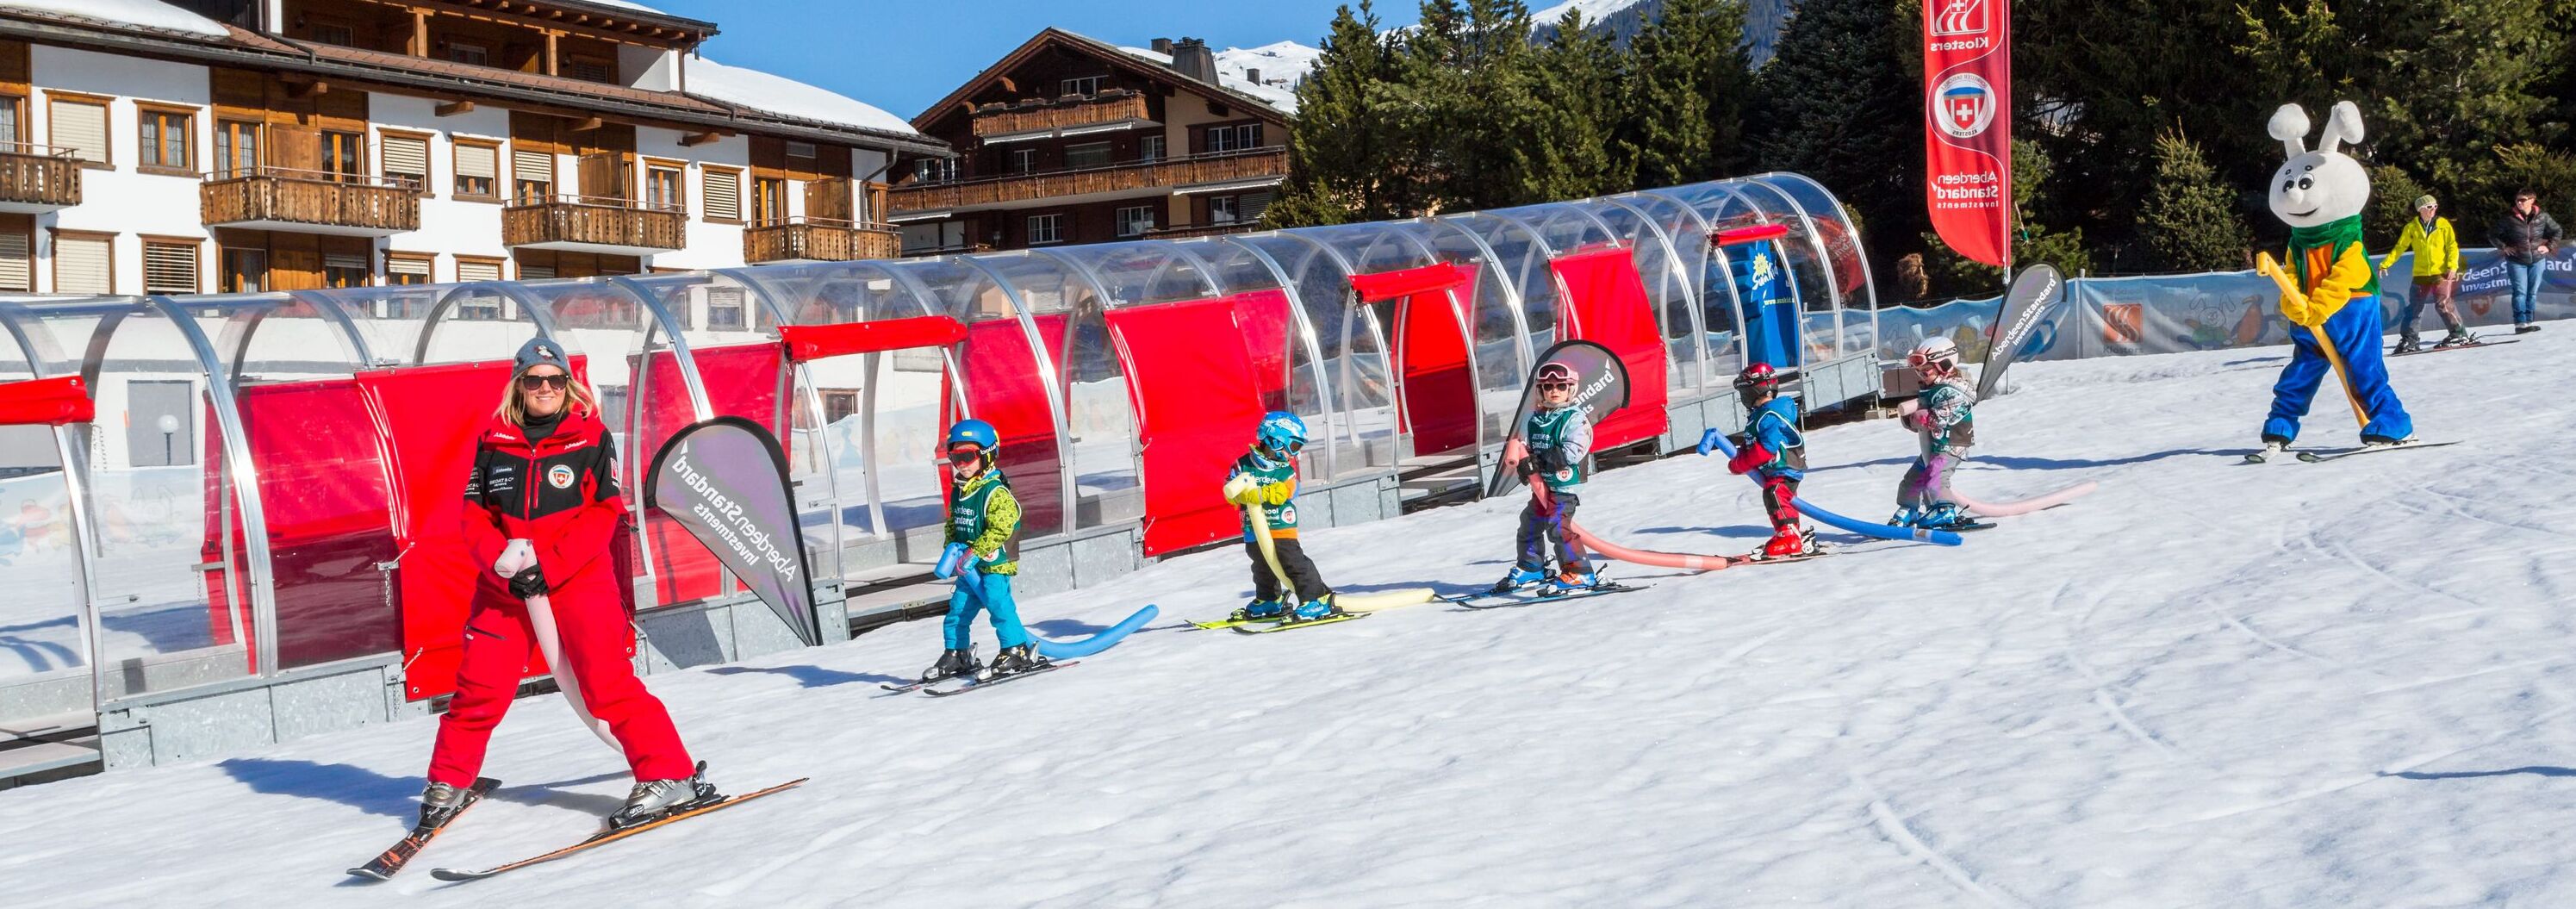 Ski group in the children's area of the Klosters Ski School